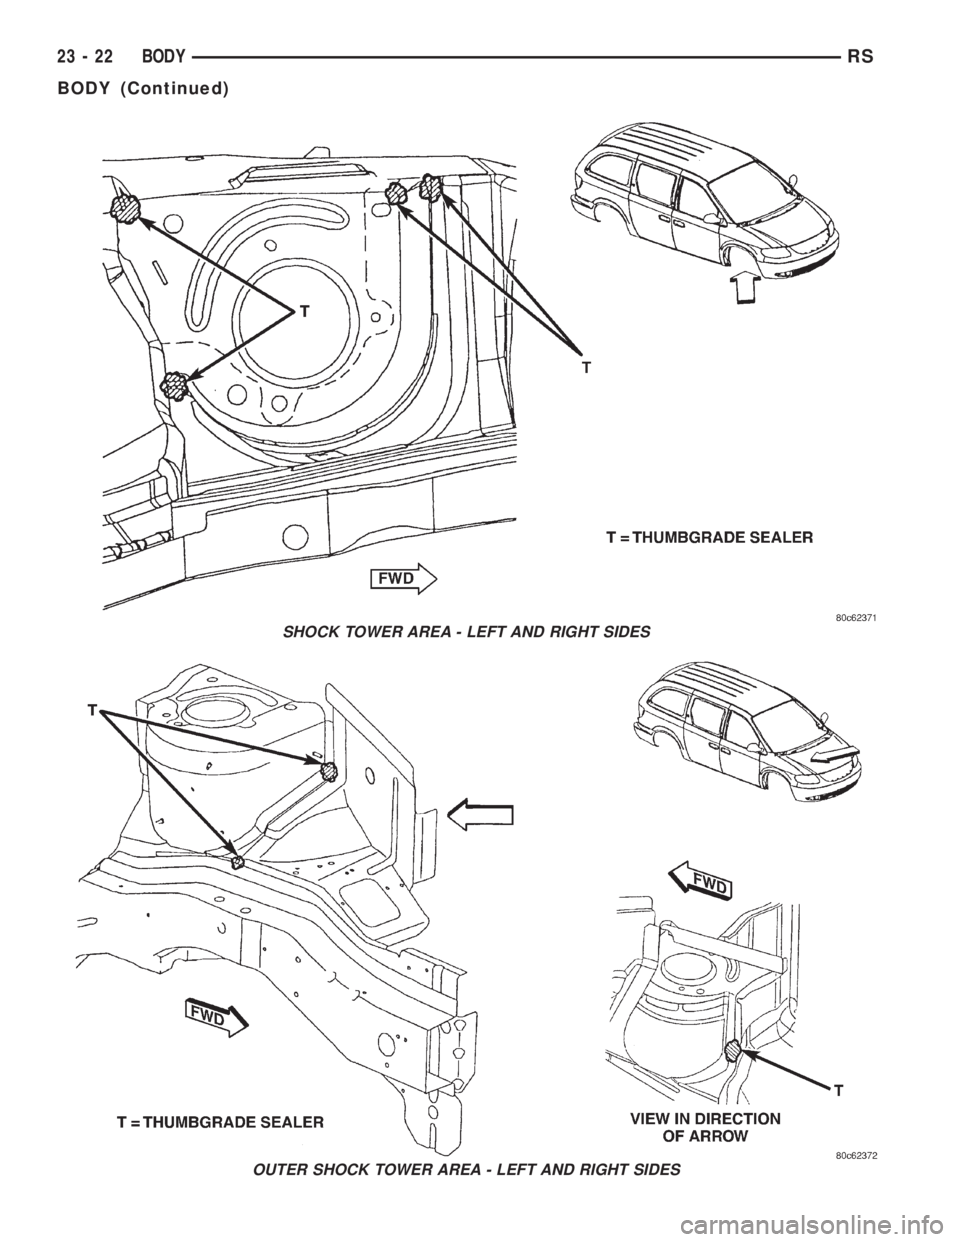 CHRYSLER VOYAGER 2001  Service Manual SHOCK TOWER AREA - LEFT AND RIGHT SIDES
OUTER SHOCK TOWER AREA - LEFT AND RIGHT SIDES
23 - 22 BODYRS
BODY (Continued) 